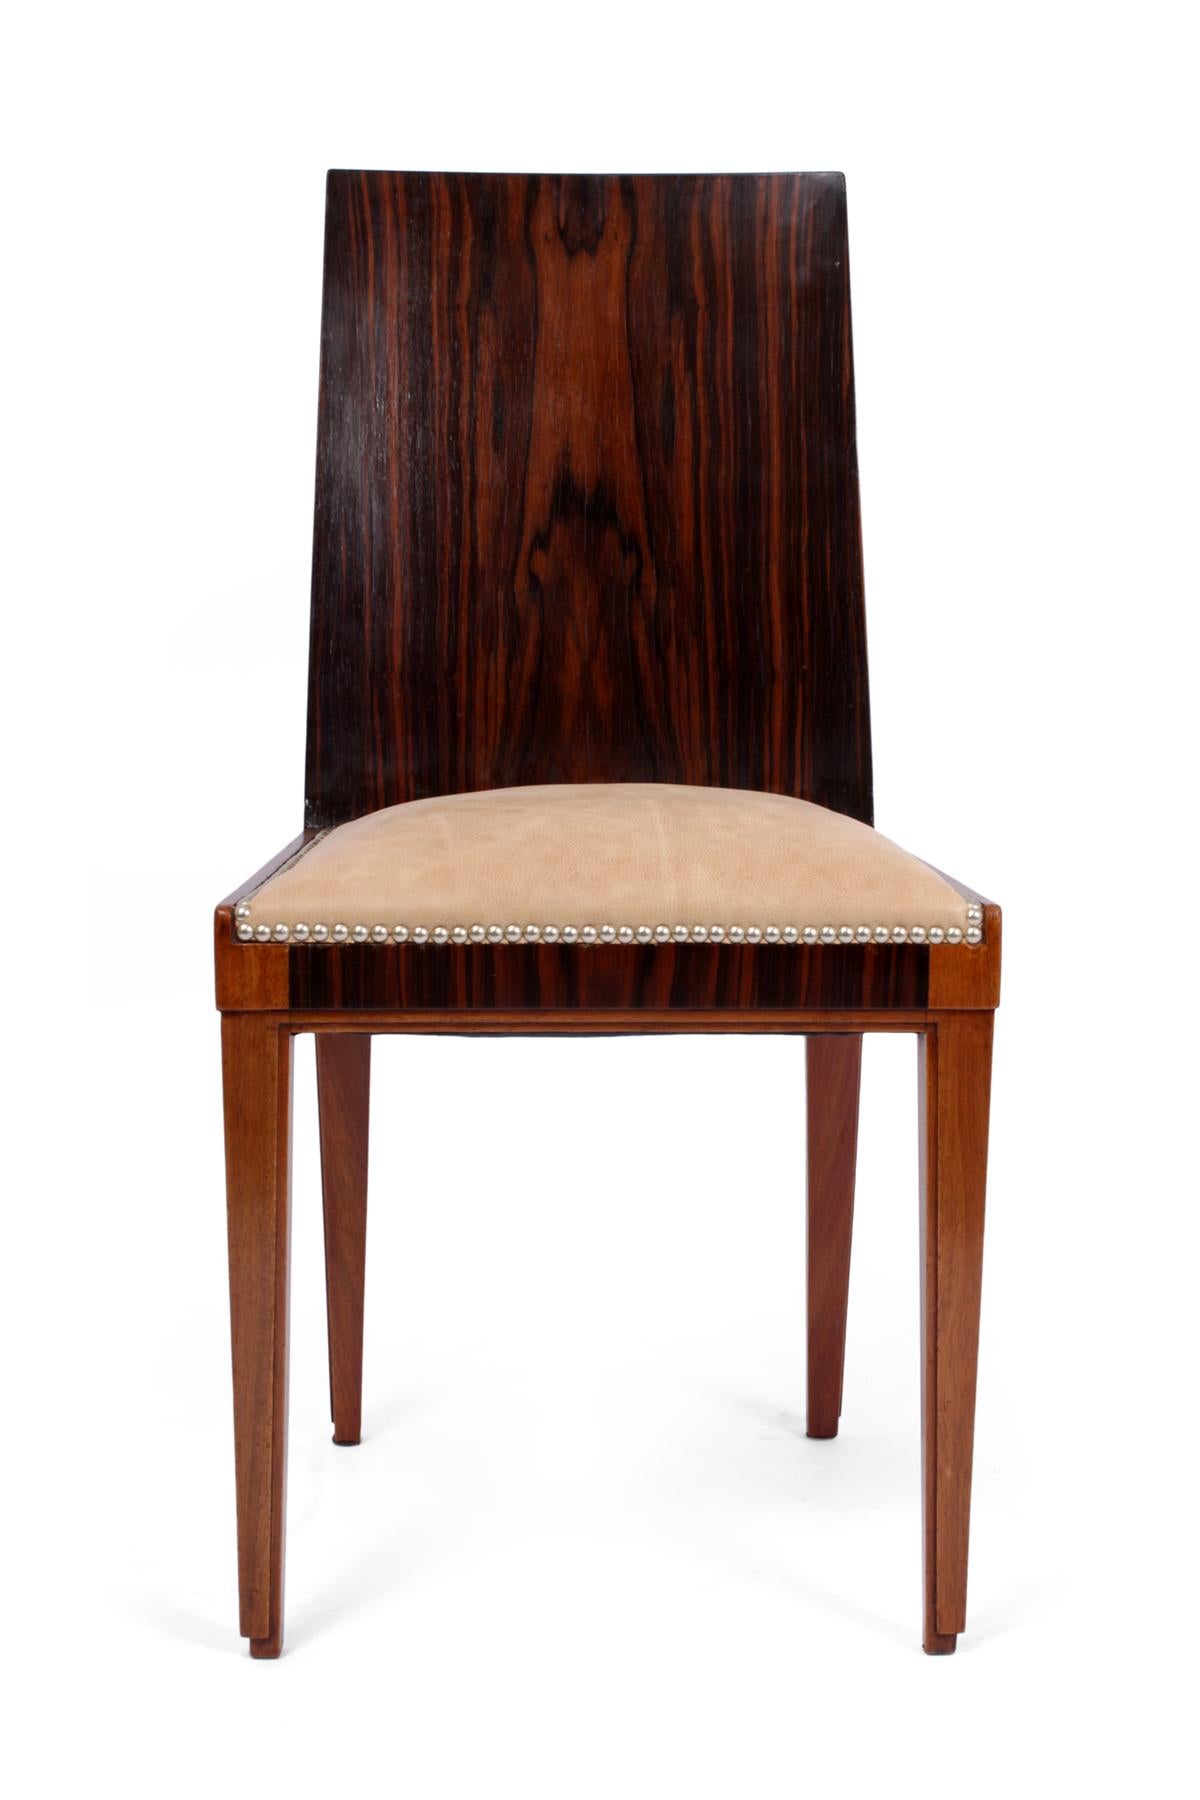 French Art Deco Macassar Ebony Dining Chairs For Sale